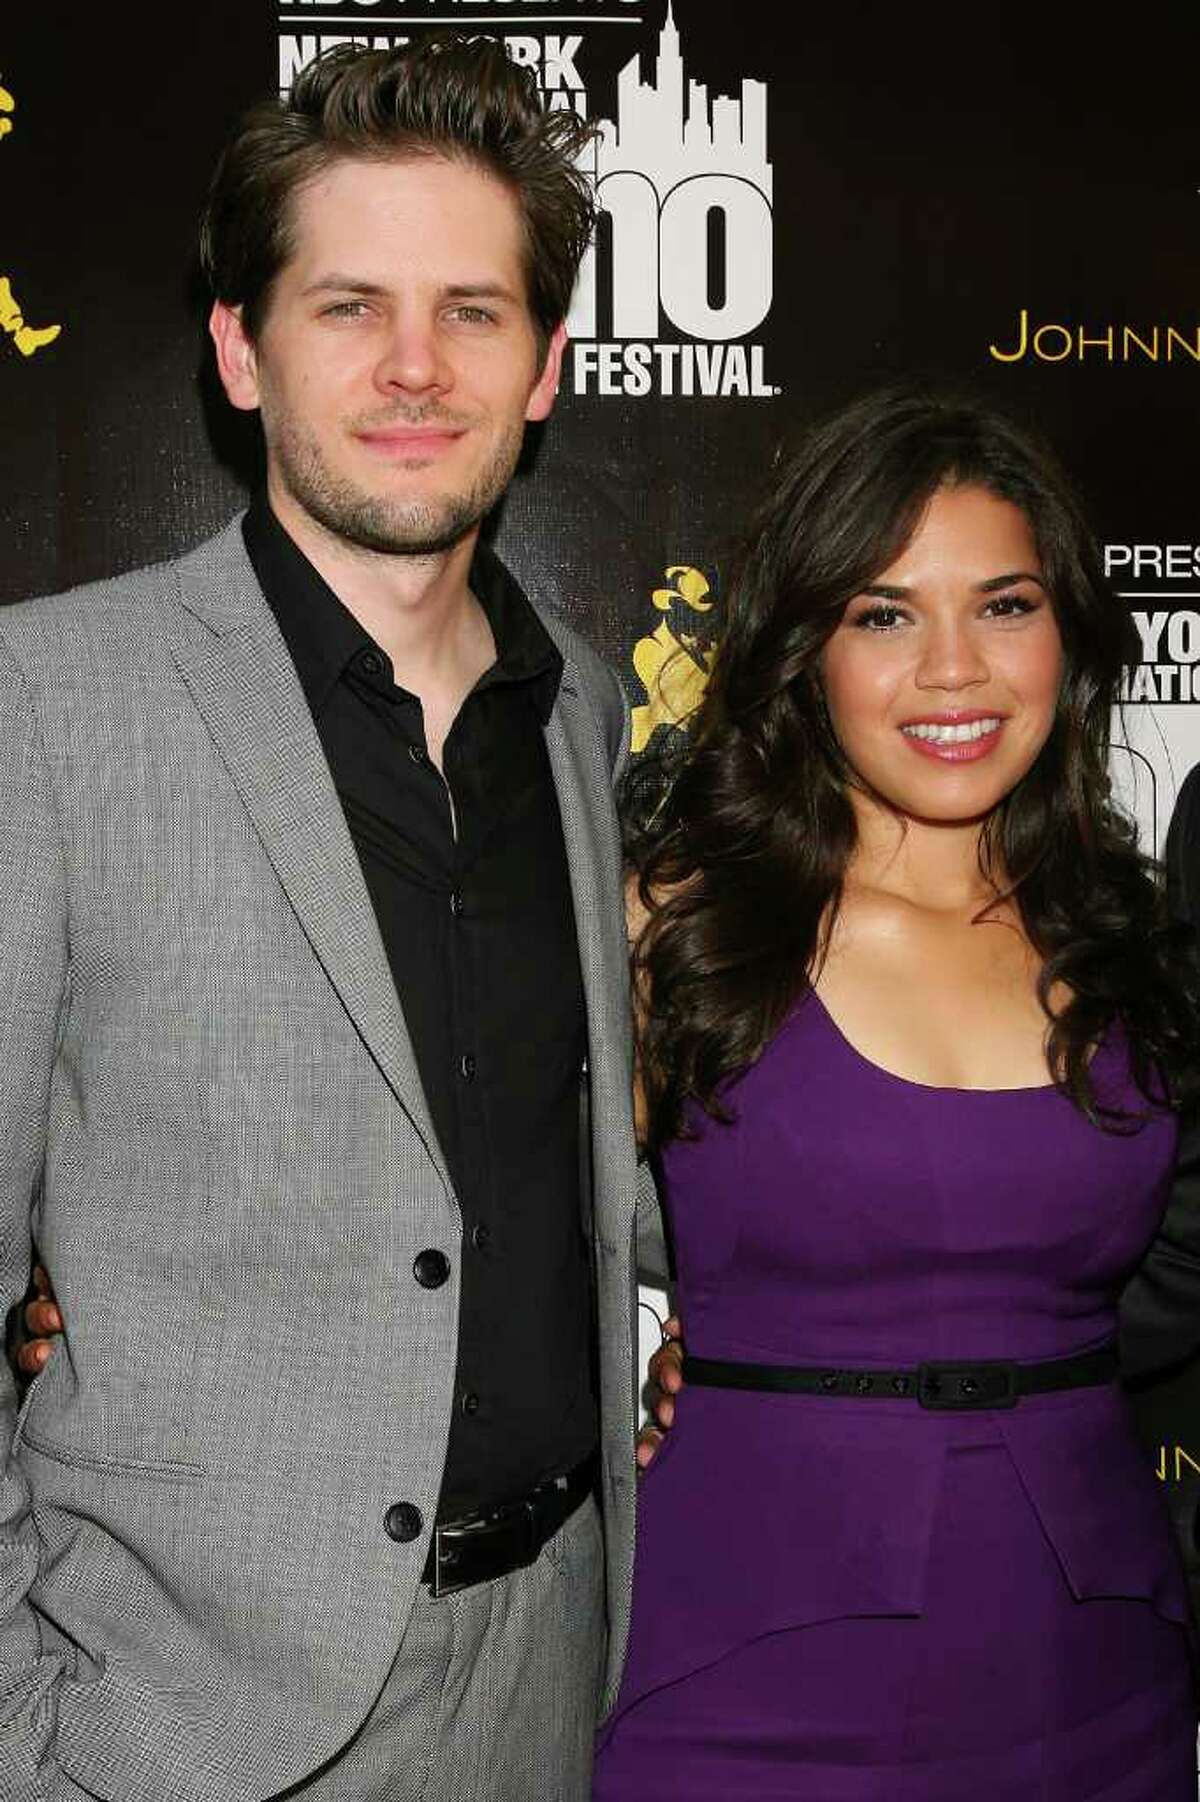 FILE - In this July 27, 2010 file photo provided by StarPix, actress America Ferrera and her fiance director Ryan Piers Williams arrive at the the 2010 New York International Latino Film Festival opening film "Day Land." Ferrera's representative confirmed Tuesday, June 28, 2011 that Ferrera and Williams wed Monday. (AP Photo/Dave Allocca, StarPix, file)